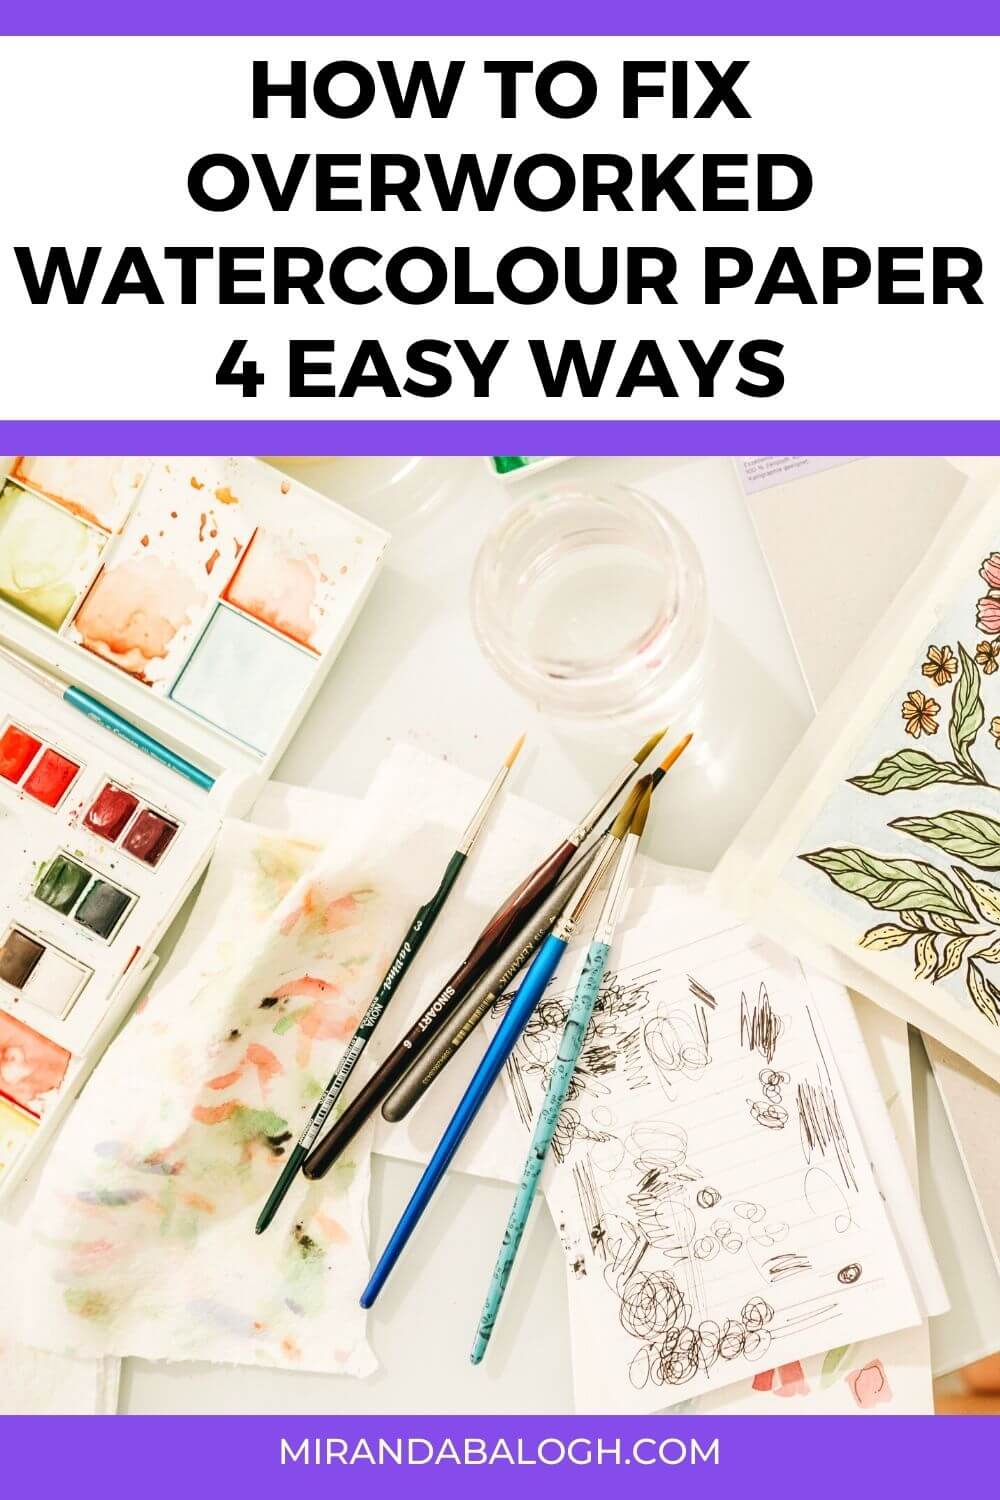 What are some tips to fix overworked watercolor paper? - Quora